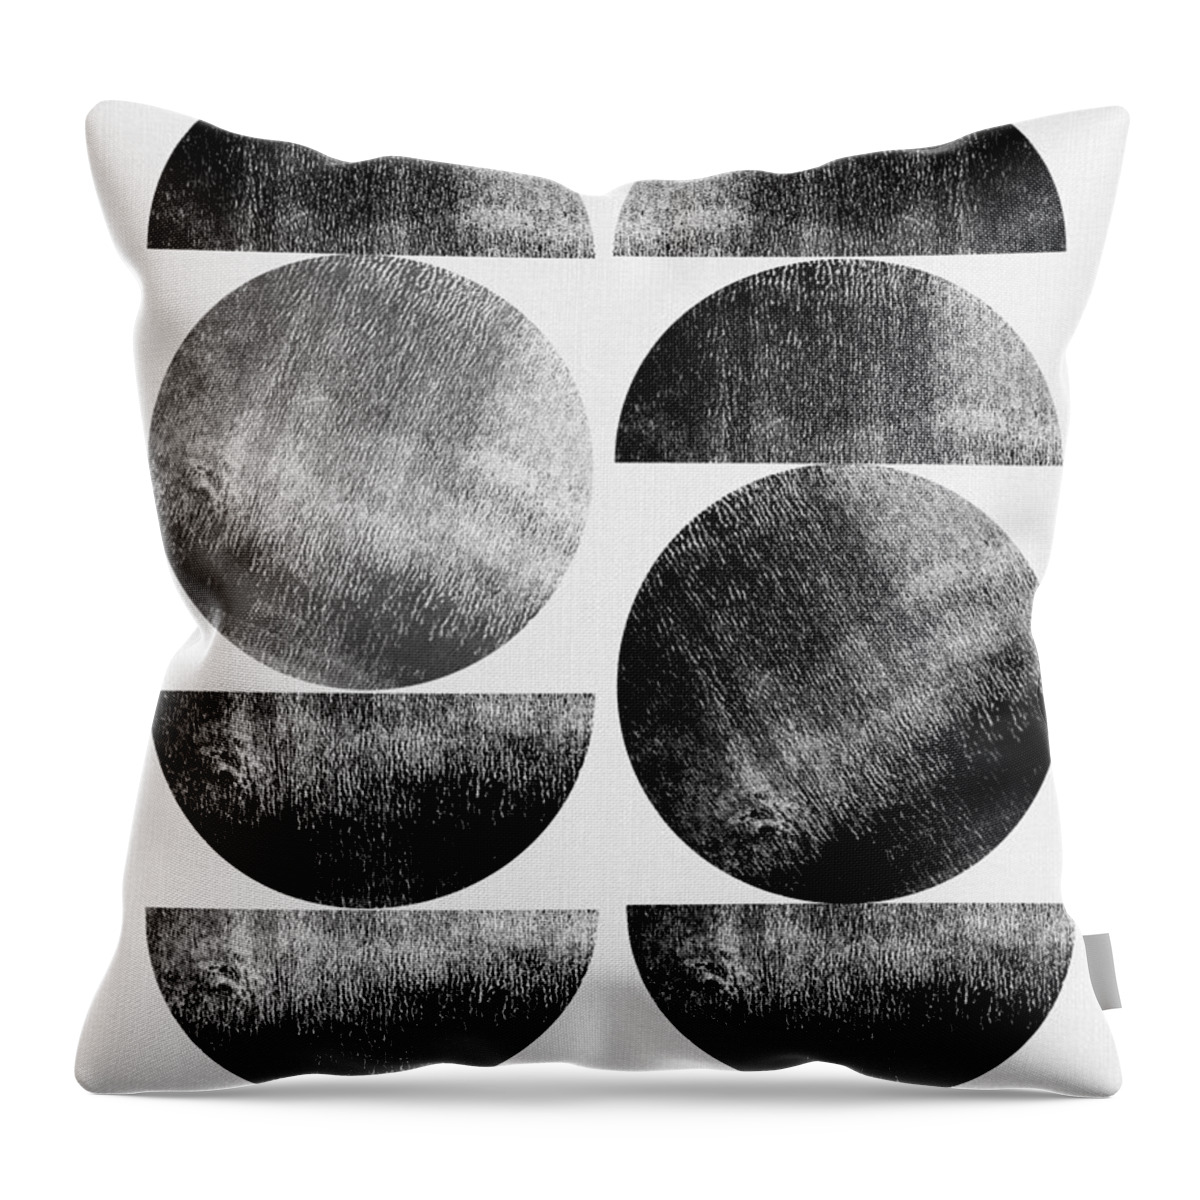 Black And White Throw Pillow featuring the mixed media Black Circle and Half Circles by Naxart Studio